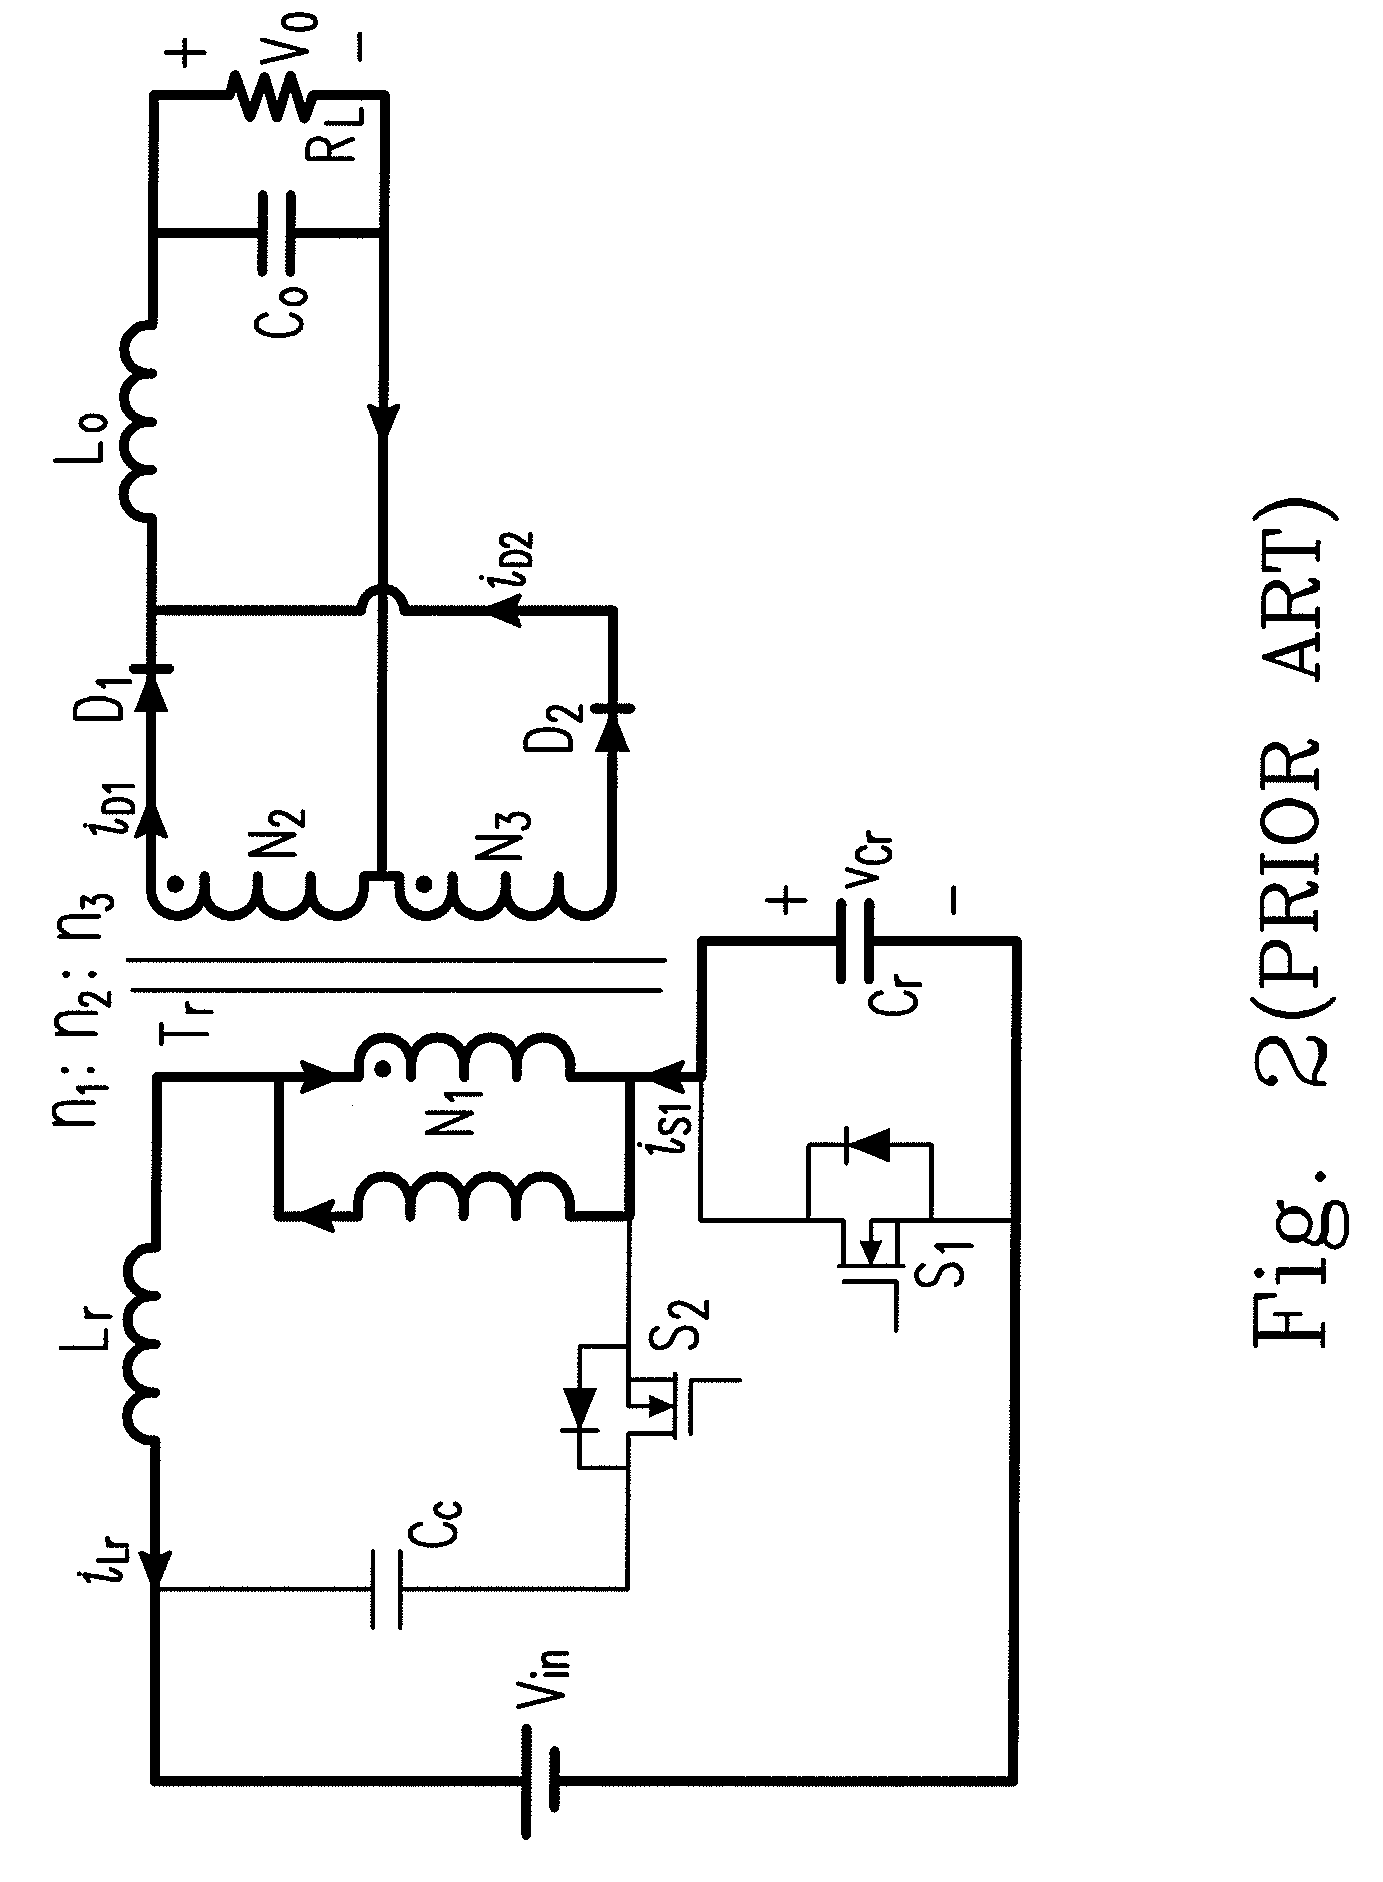 Forward-flyback converter with active-clamp circuit